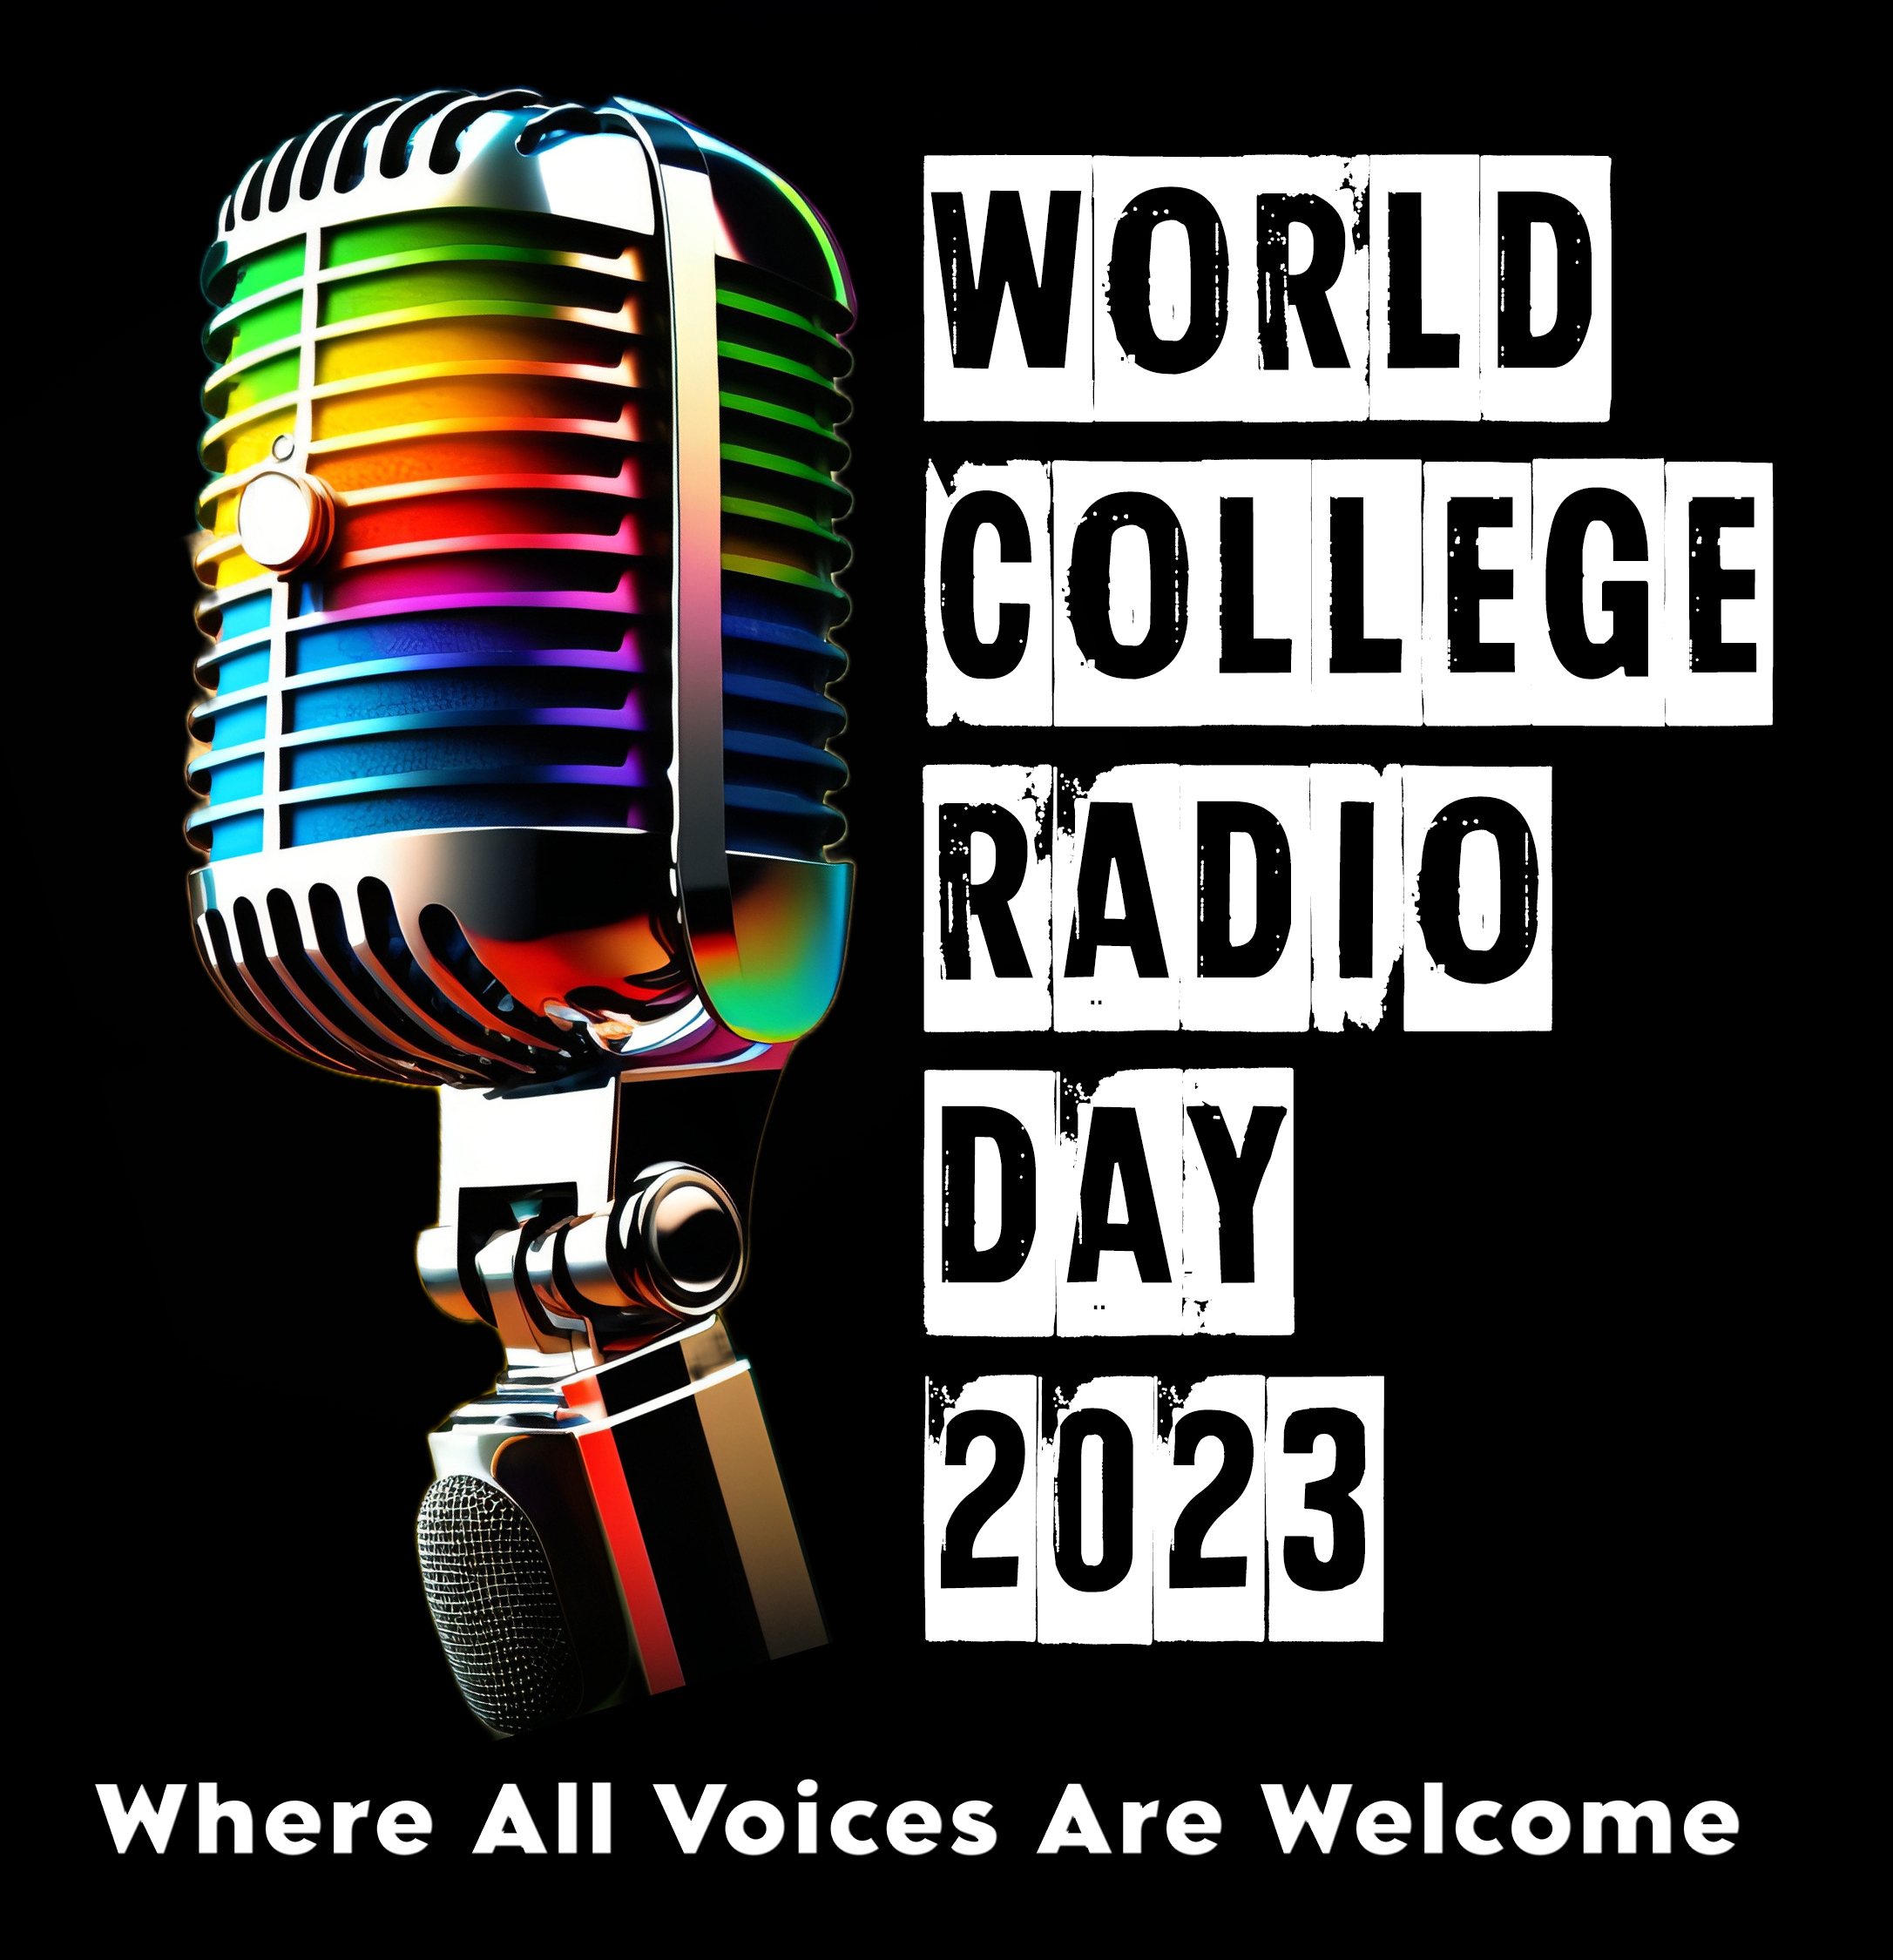 “All Voices Are Welcome” on World College Radio Day 2023, Coming This Friday, October 6